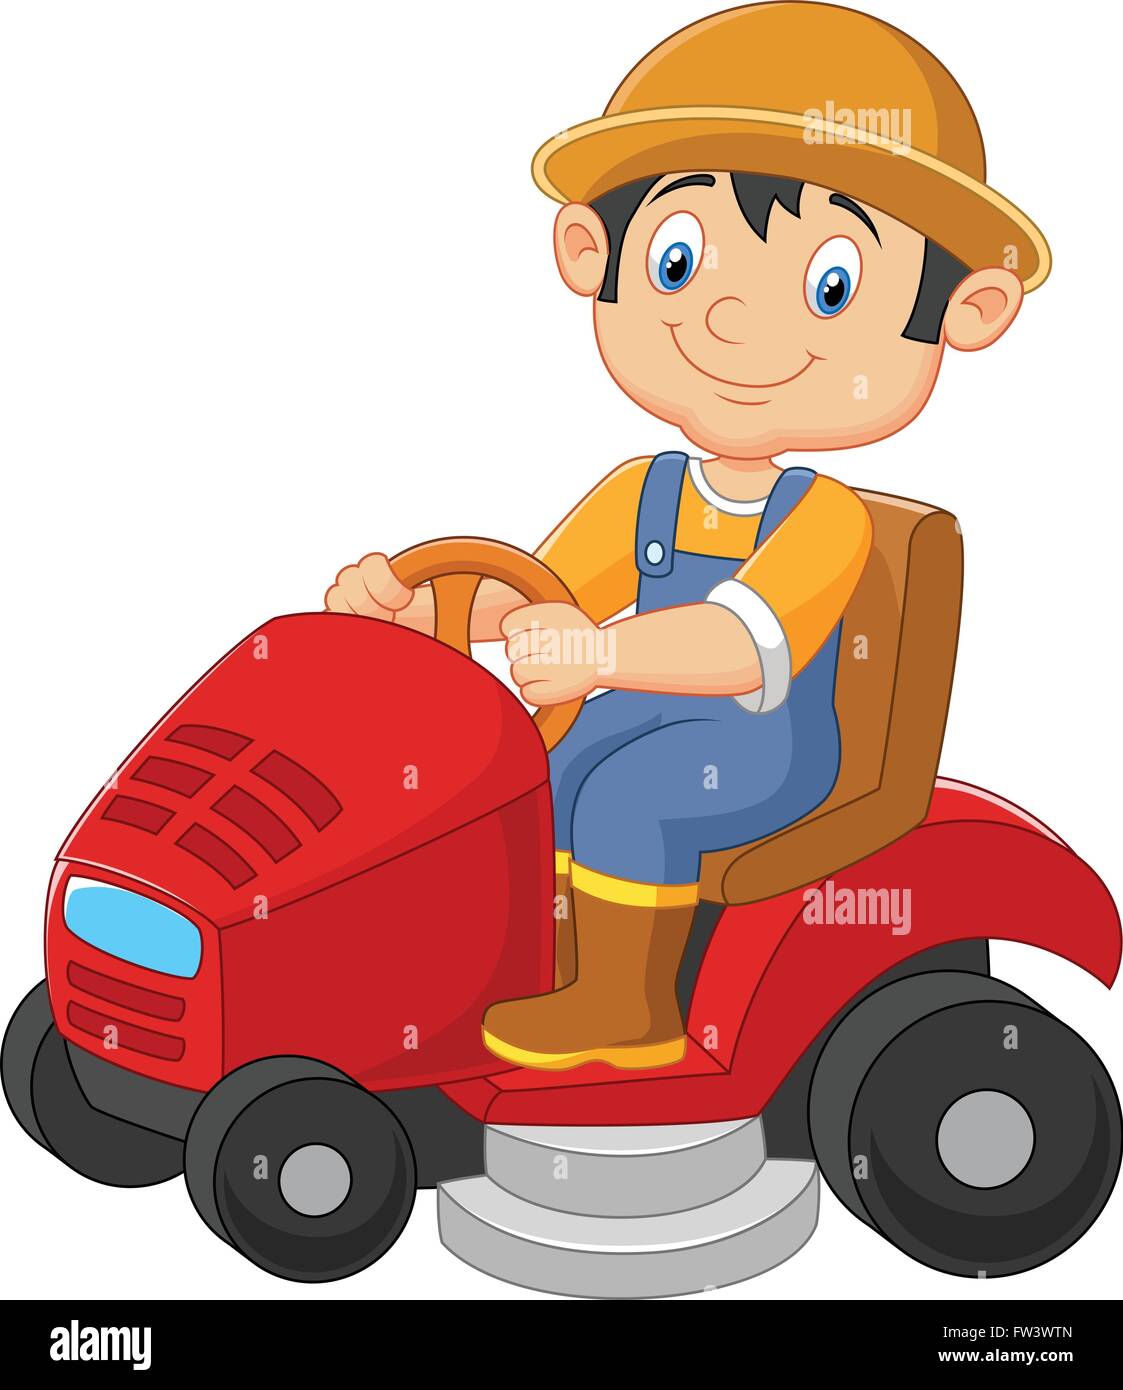 Cartoon lawn mower Stock Vector Images - Alamy